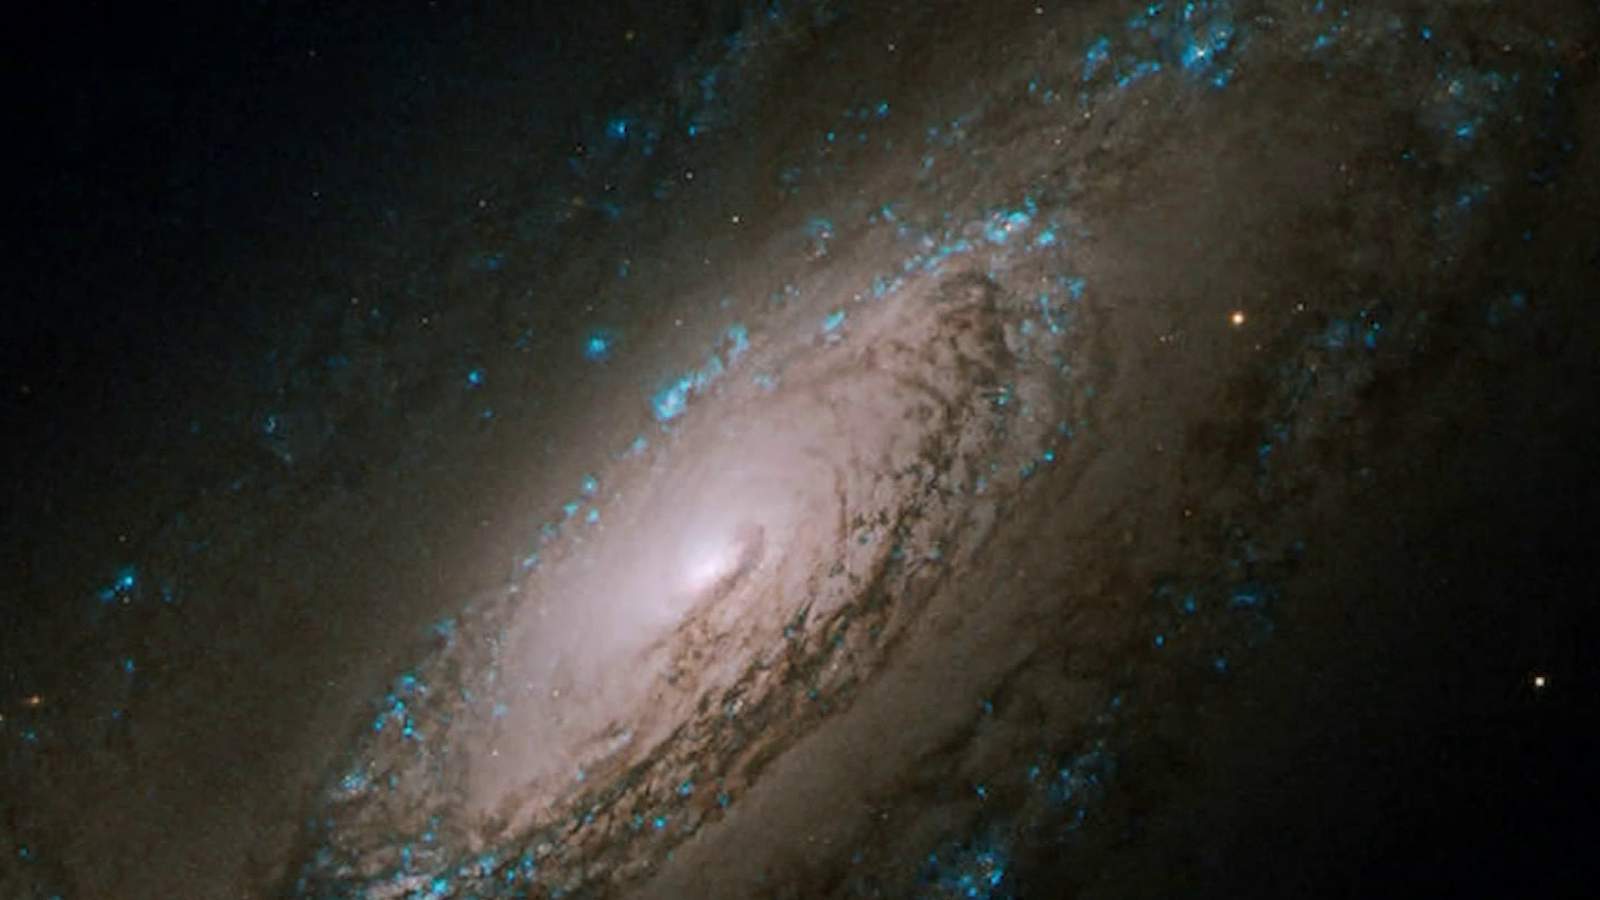 Hubble Space Telescope is a gift of science that keeps giving